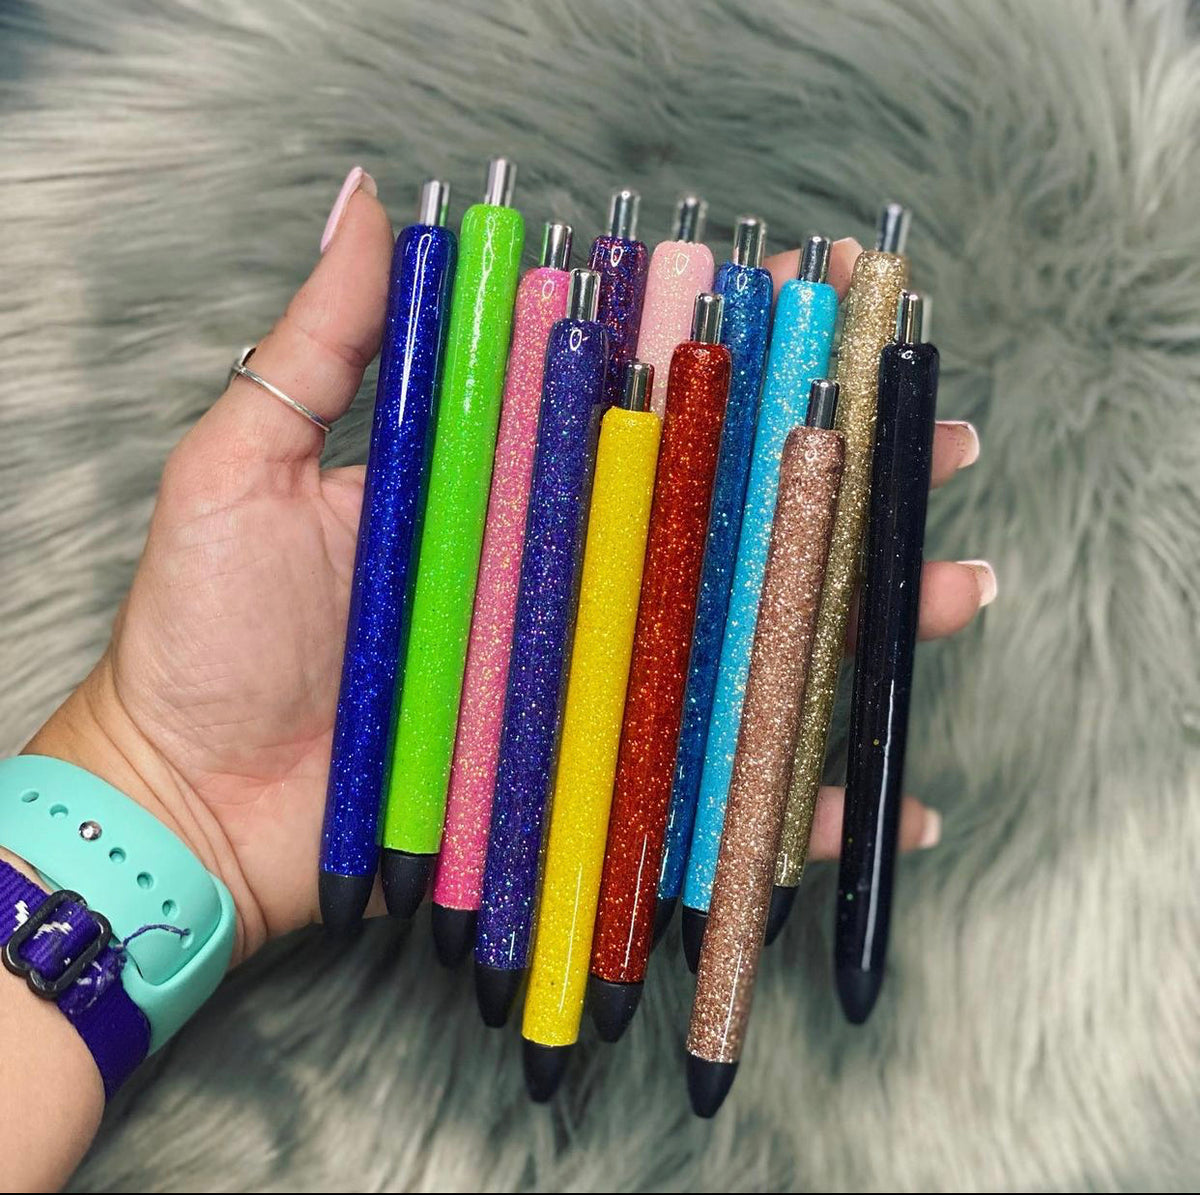 LAST CHANCE - LIMITED STOCK - SALE - Liquid Dripping Pens with Glitter